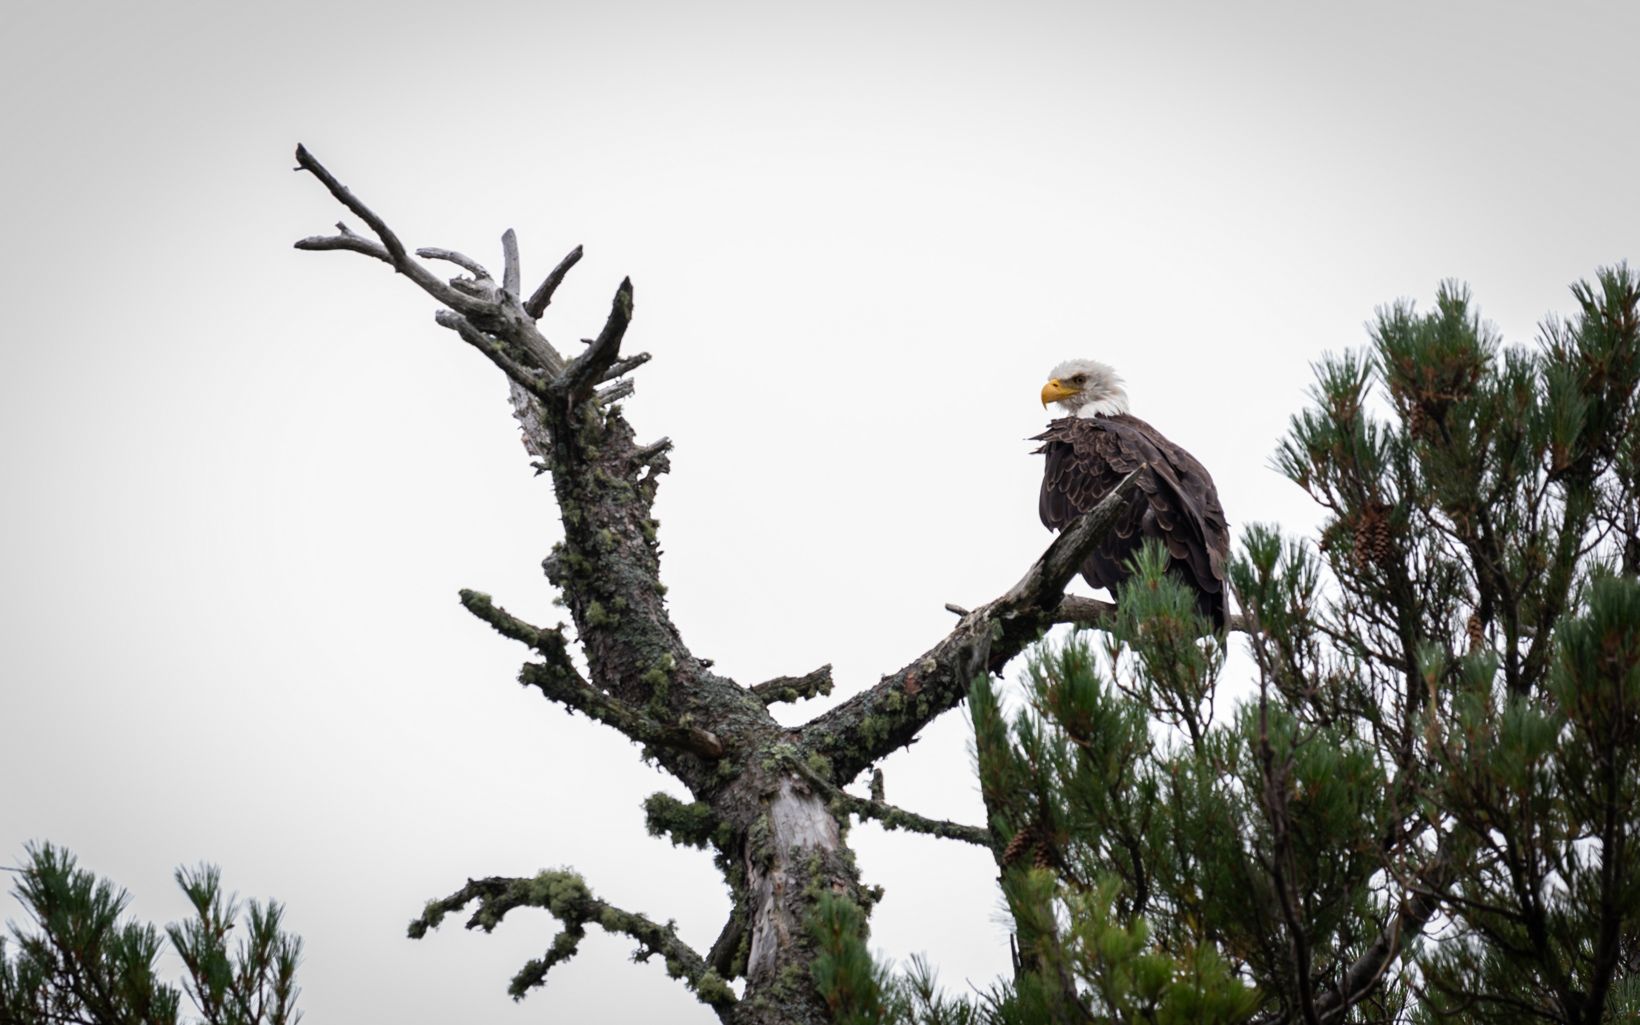 A bald eagle perches at the top of a tree in front of gray skies.